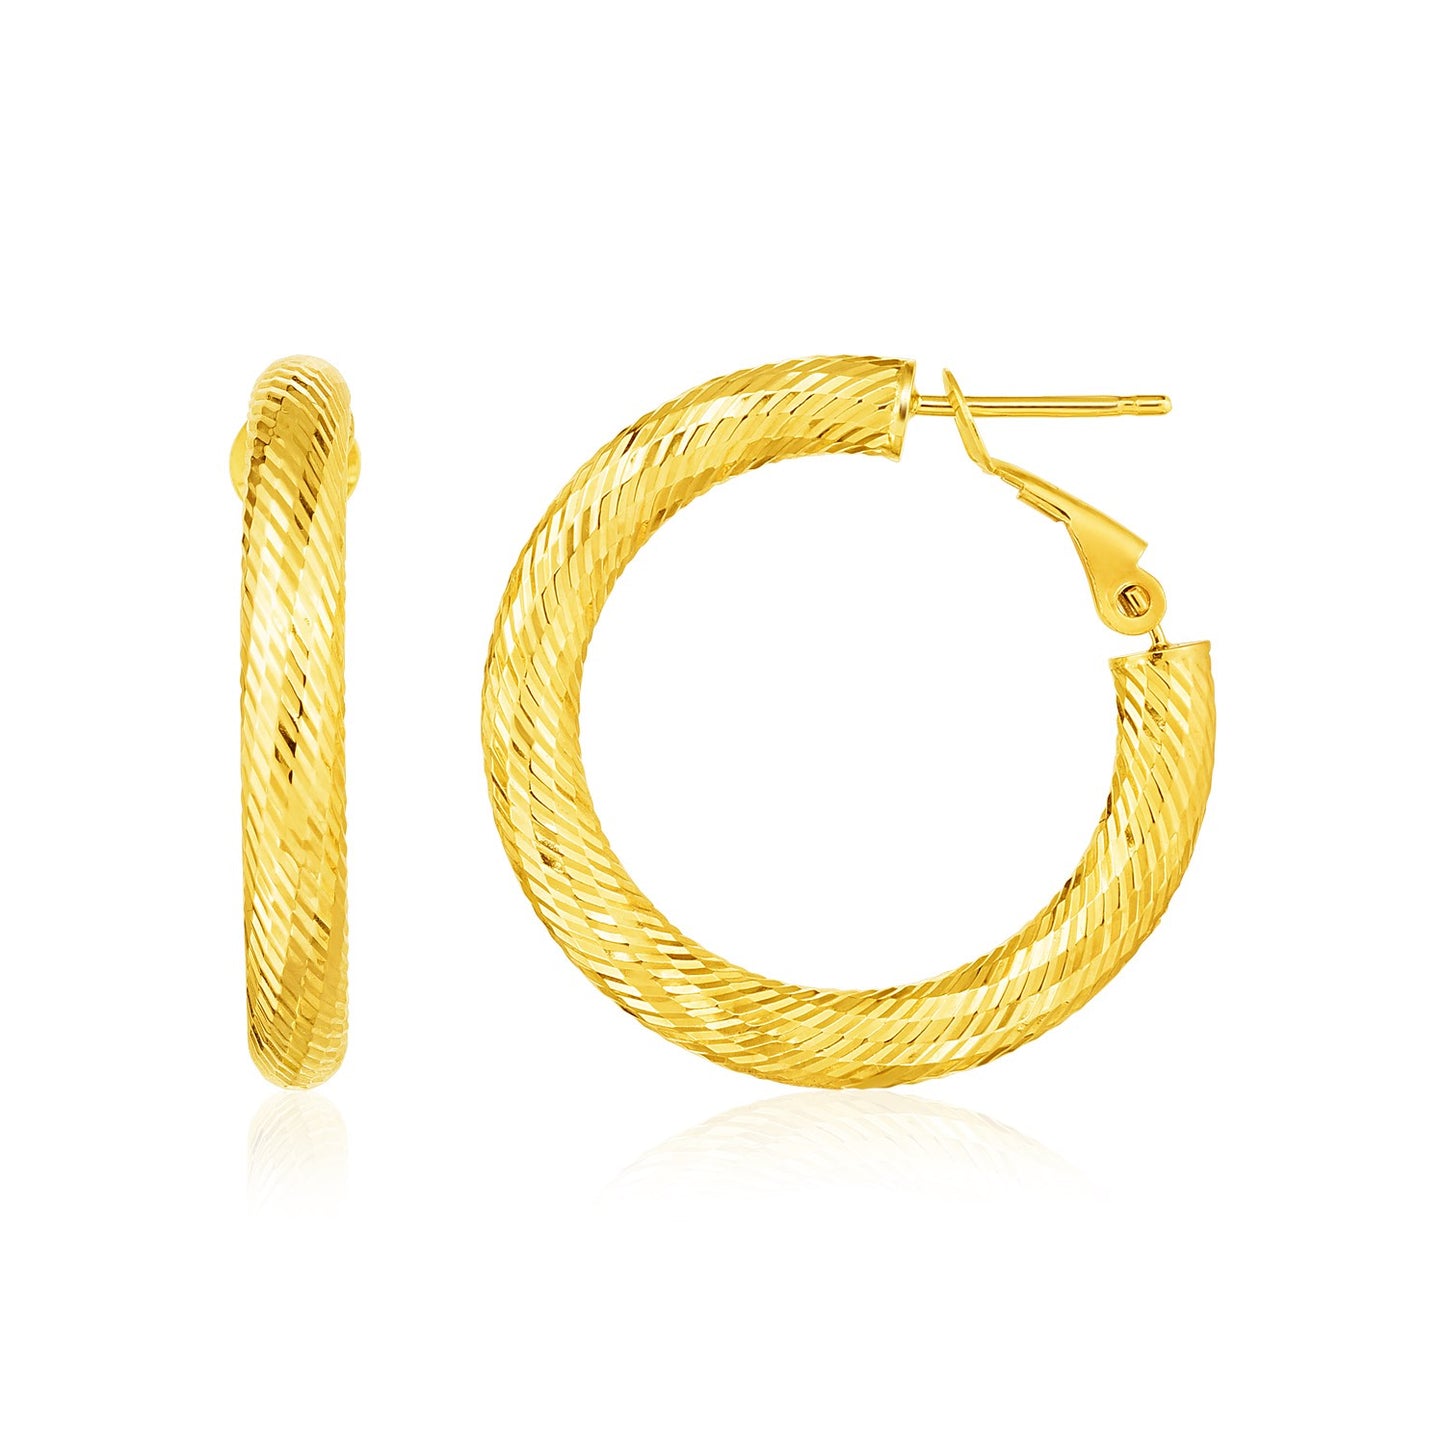 14k Yellow Gold Small Textured Round Hoop Earrings